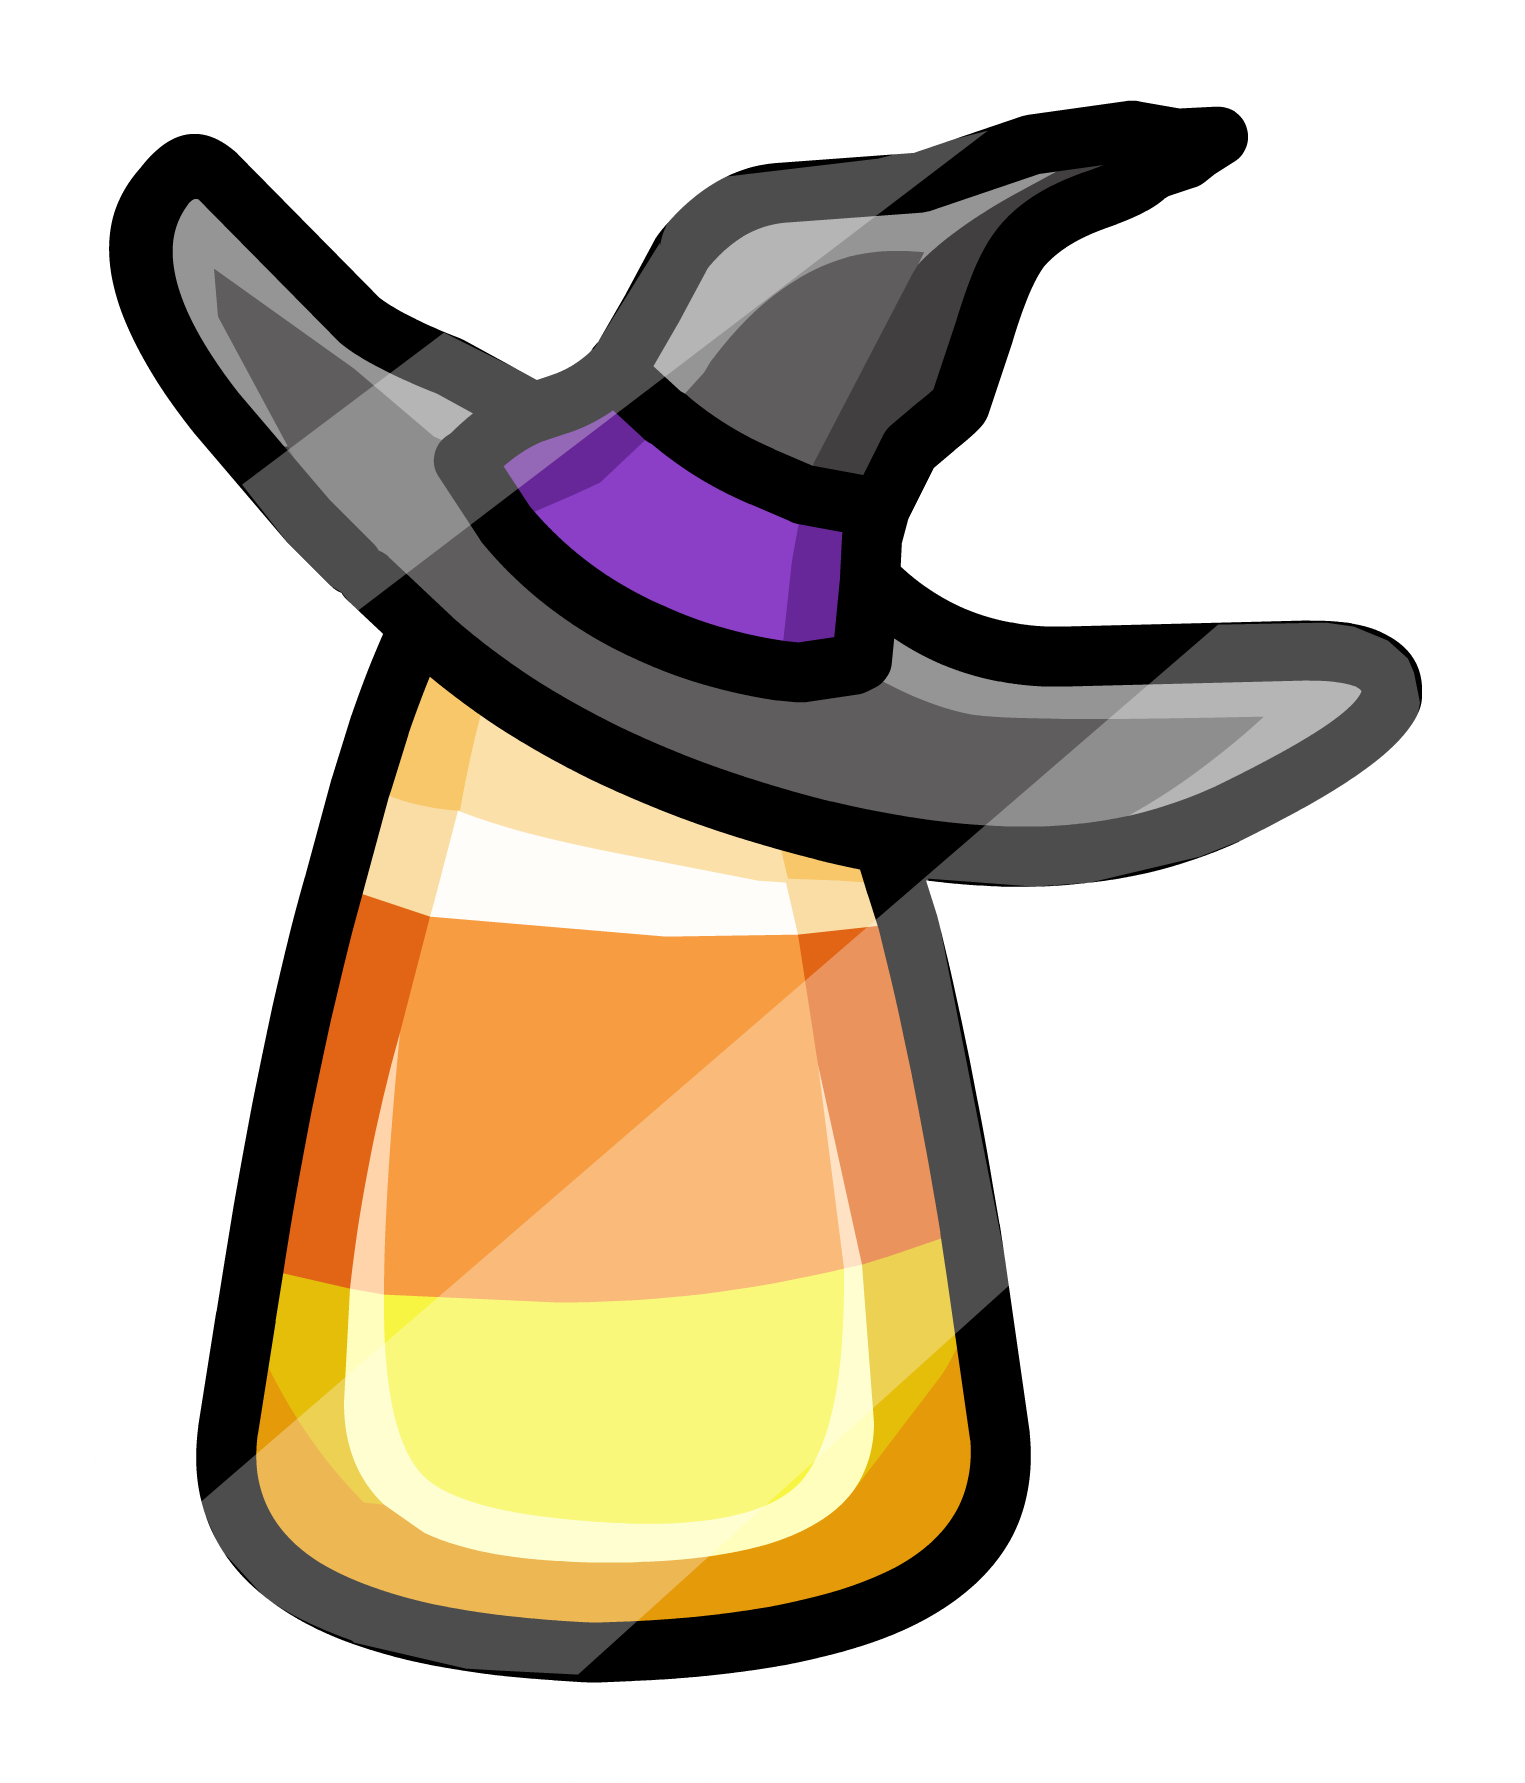 Candy Corn Potionwith Witch Hat